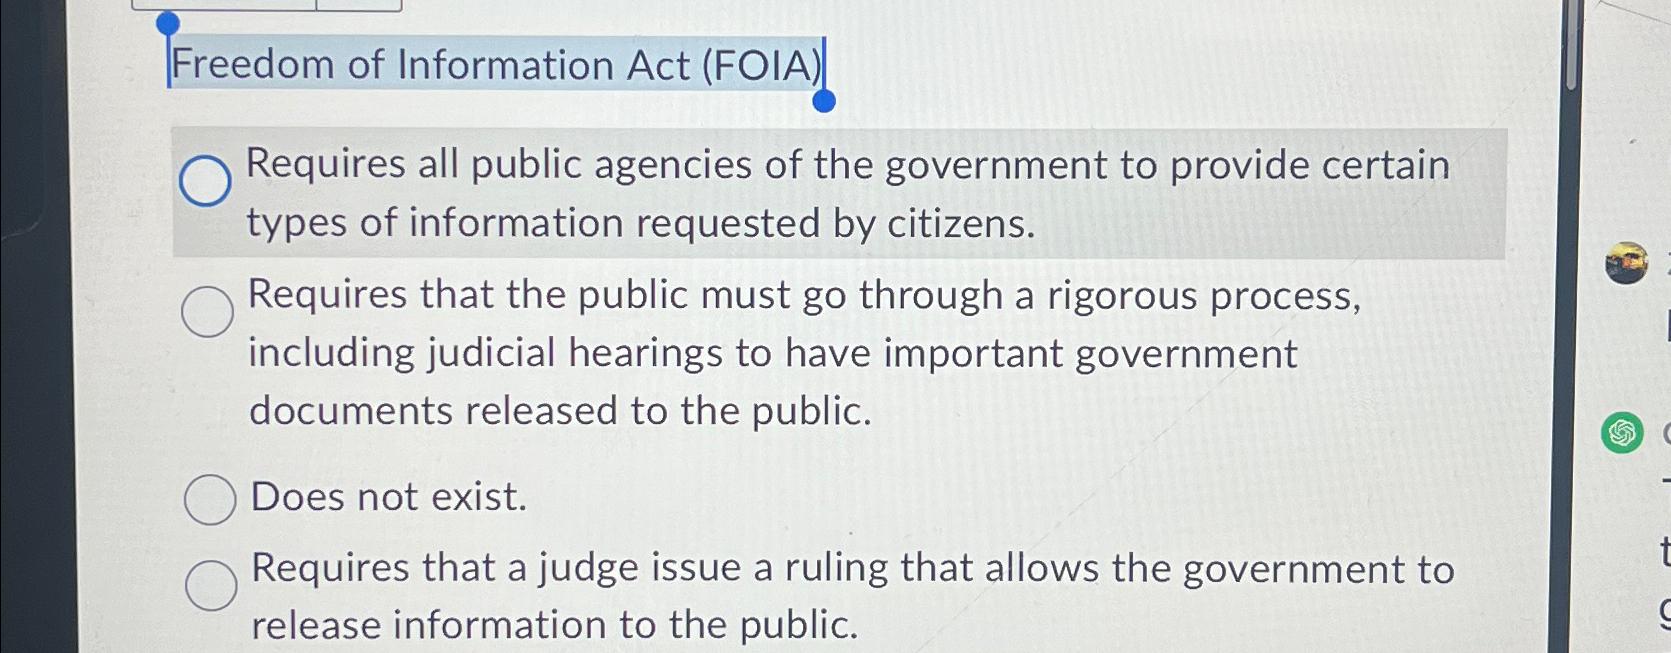 Freedom of Information Act (FOIA) Requires all public agencies of the government to provide certain types of